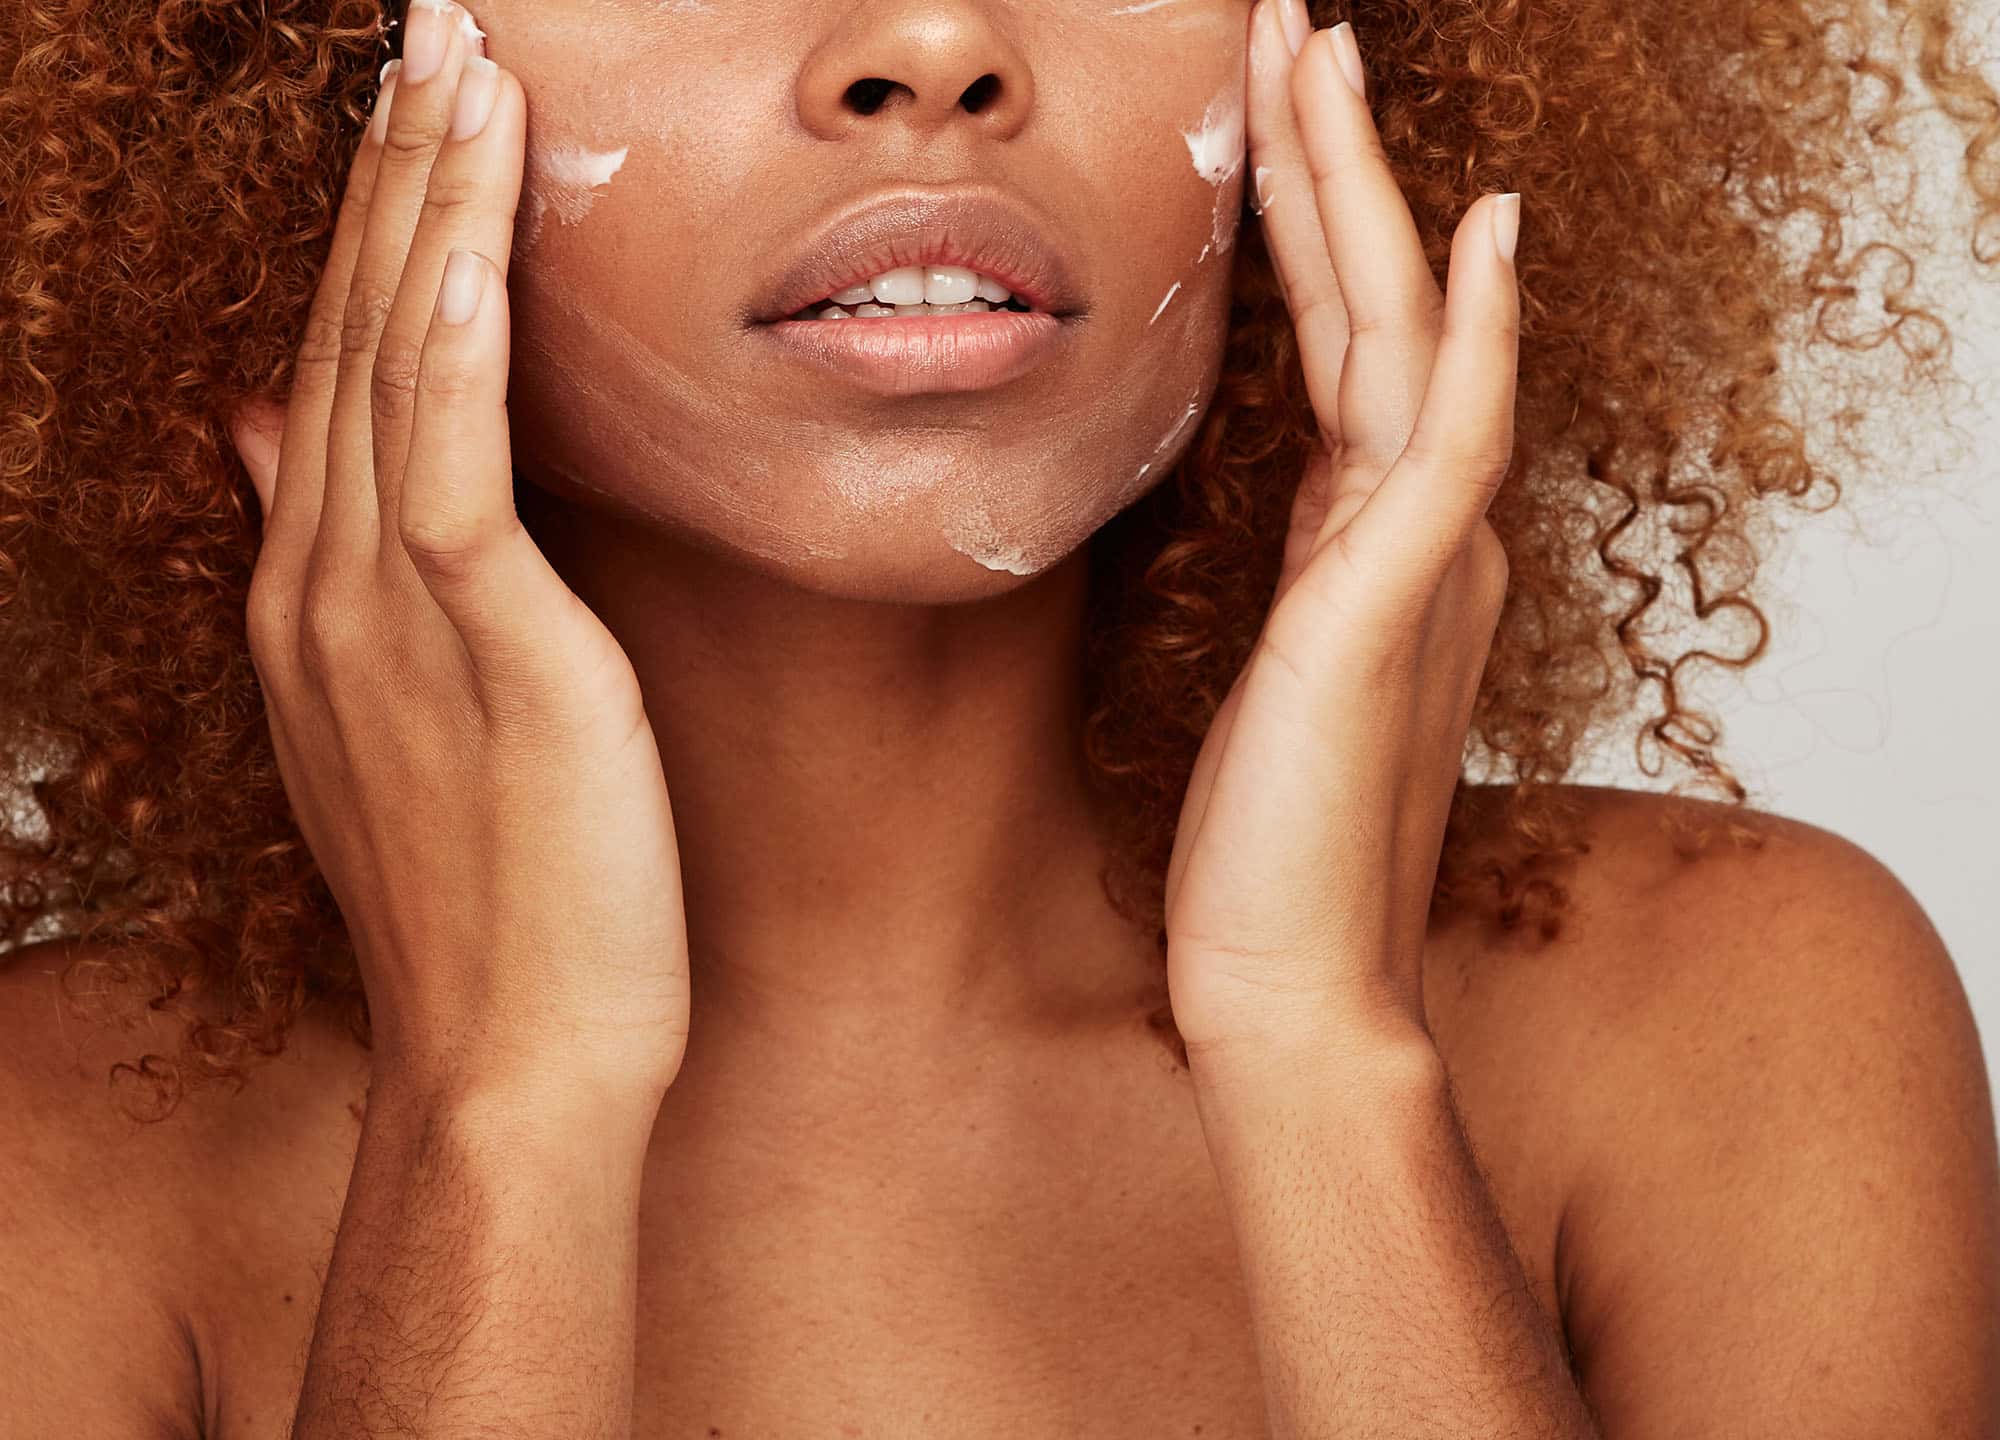 We all have skin issues, but when it comes to skin of color, there can be more issues than zits and wrinkles. Here are 4 pro tips on how to care for melanated skin.